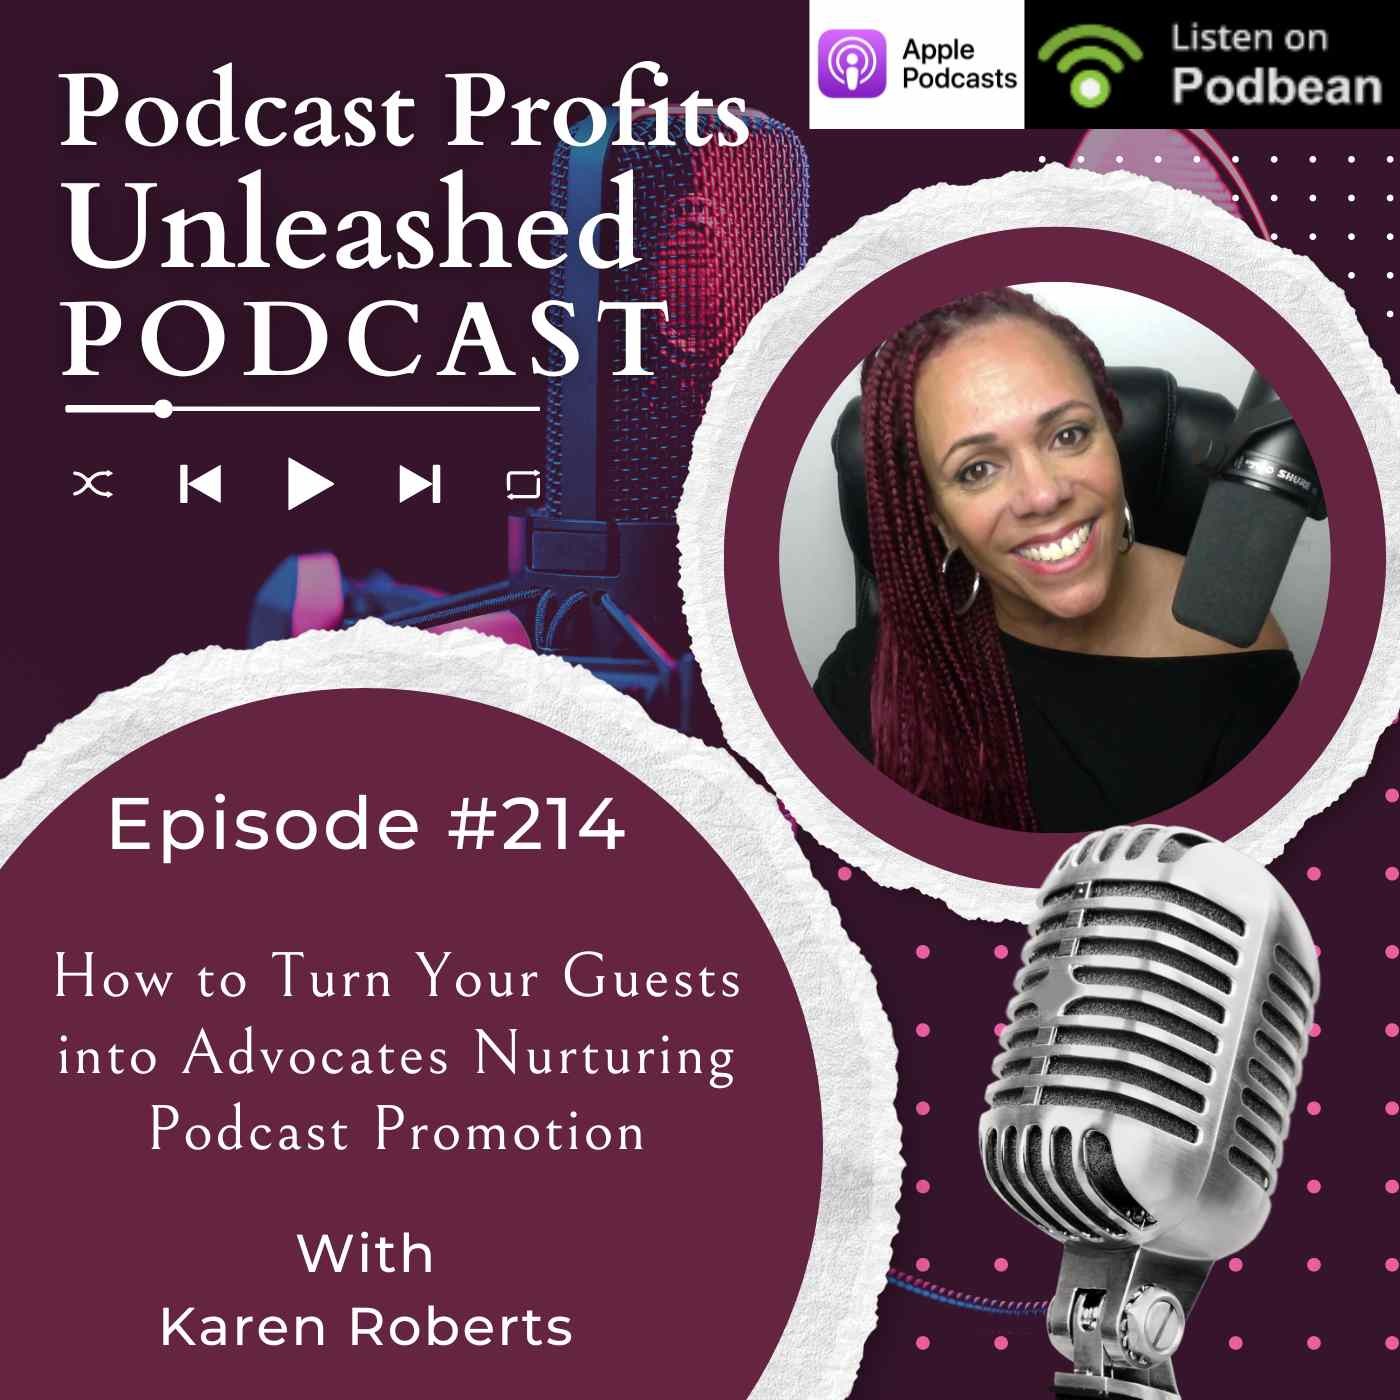 How to Turn Your Guests into Advocates Nurturing Podcast Promotion